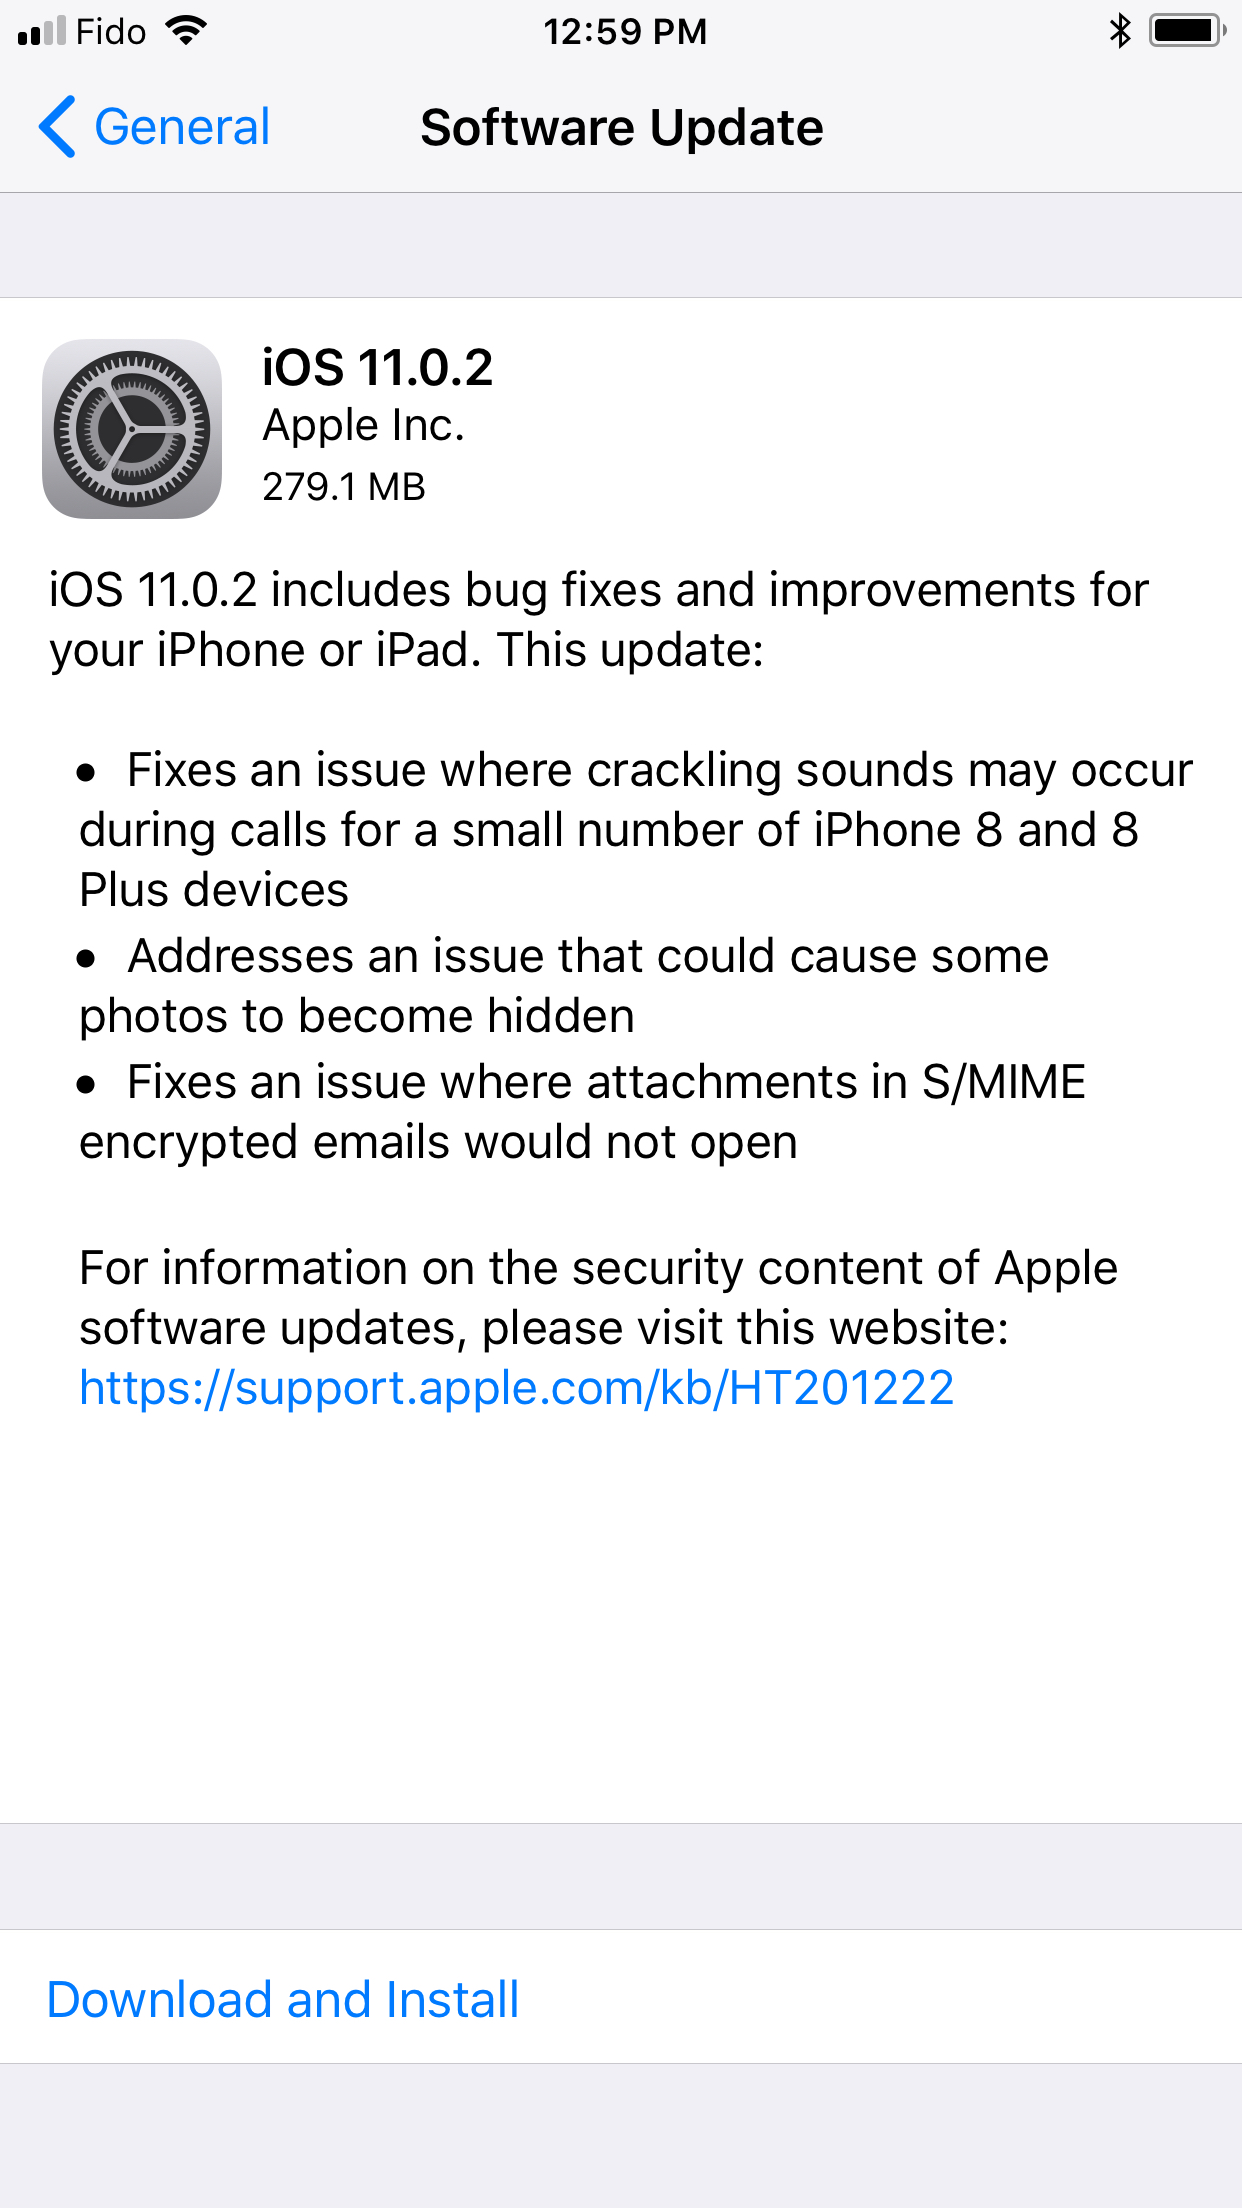 Apple Releases iOS 11.0.2 for iPhone, iPad, iPod touch [Download]